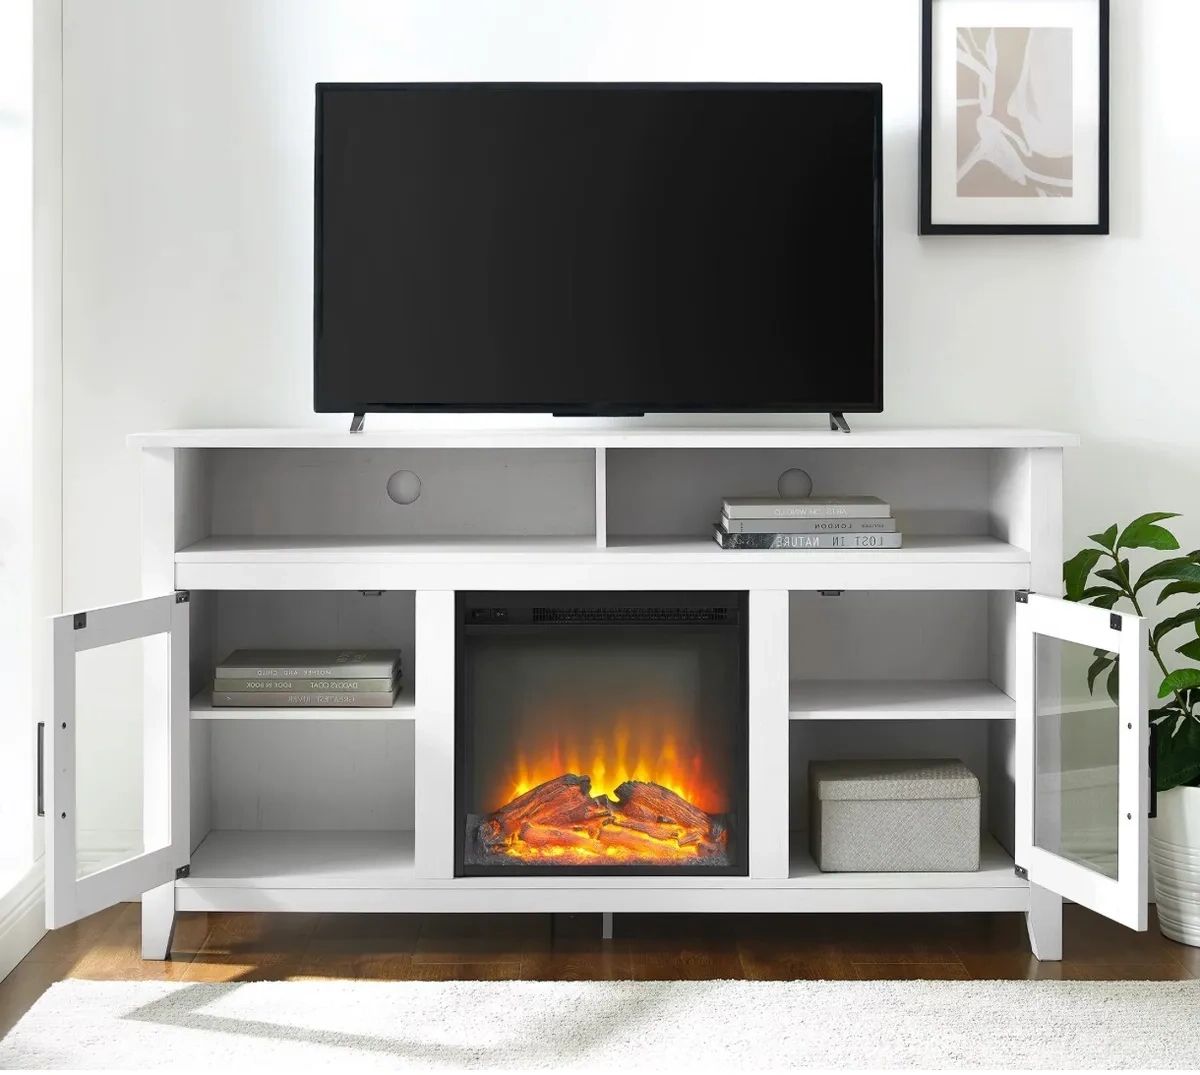 Woven Paths Highboy 2 Door Electric Fireplace Tv Stand For Tvs Up To 65",  Brushe | Ebay With Wood Highboy Fireplace Tv Stands (View 11 of 20)